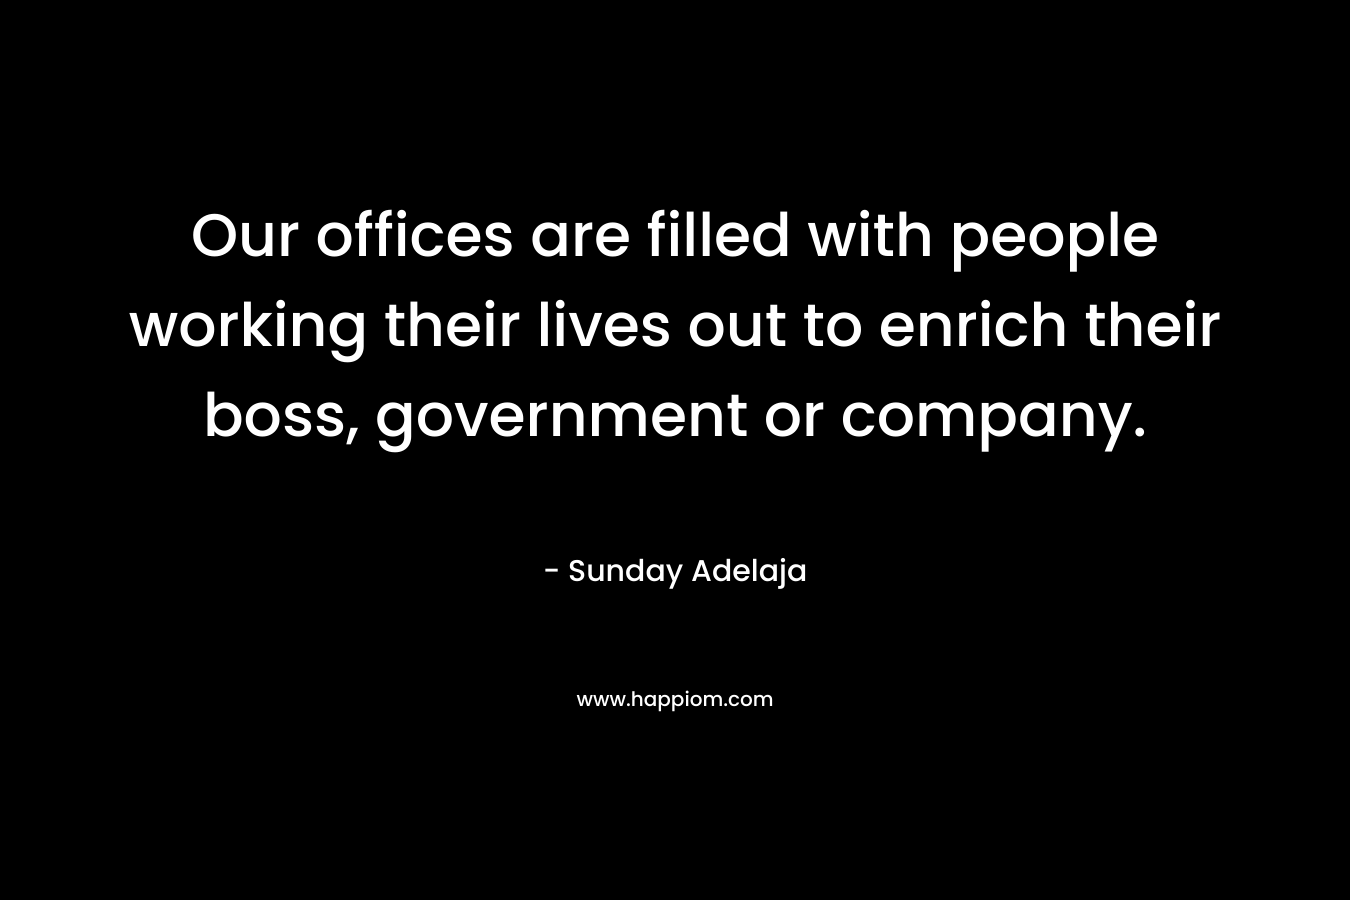 Our offices are filled with people working their lives out to enrich their boss, government or company.